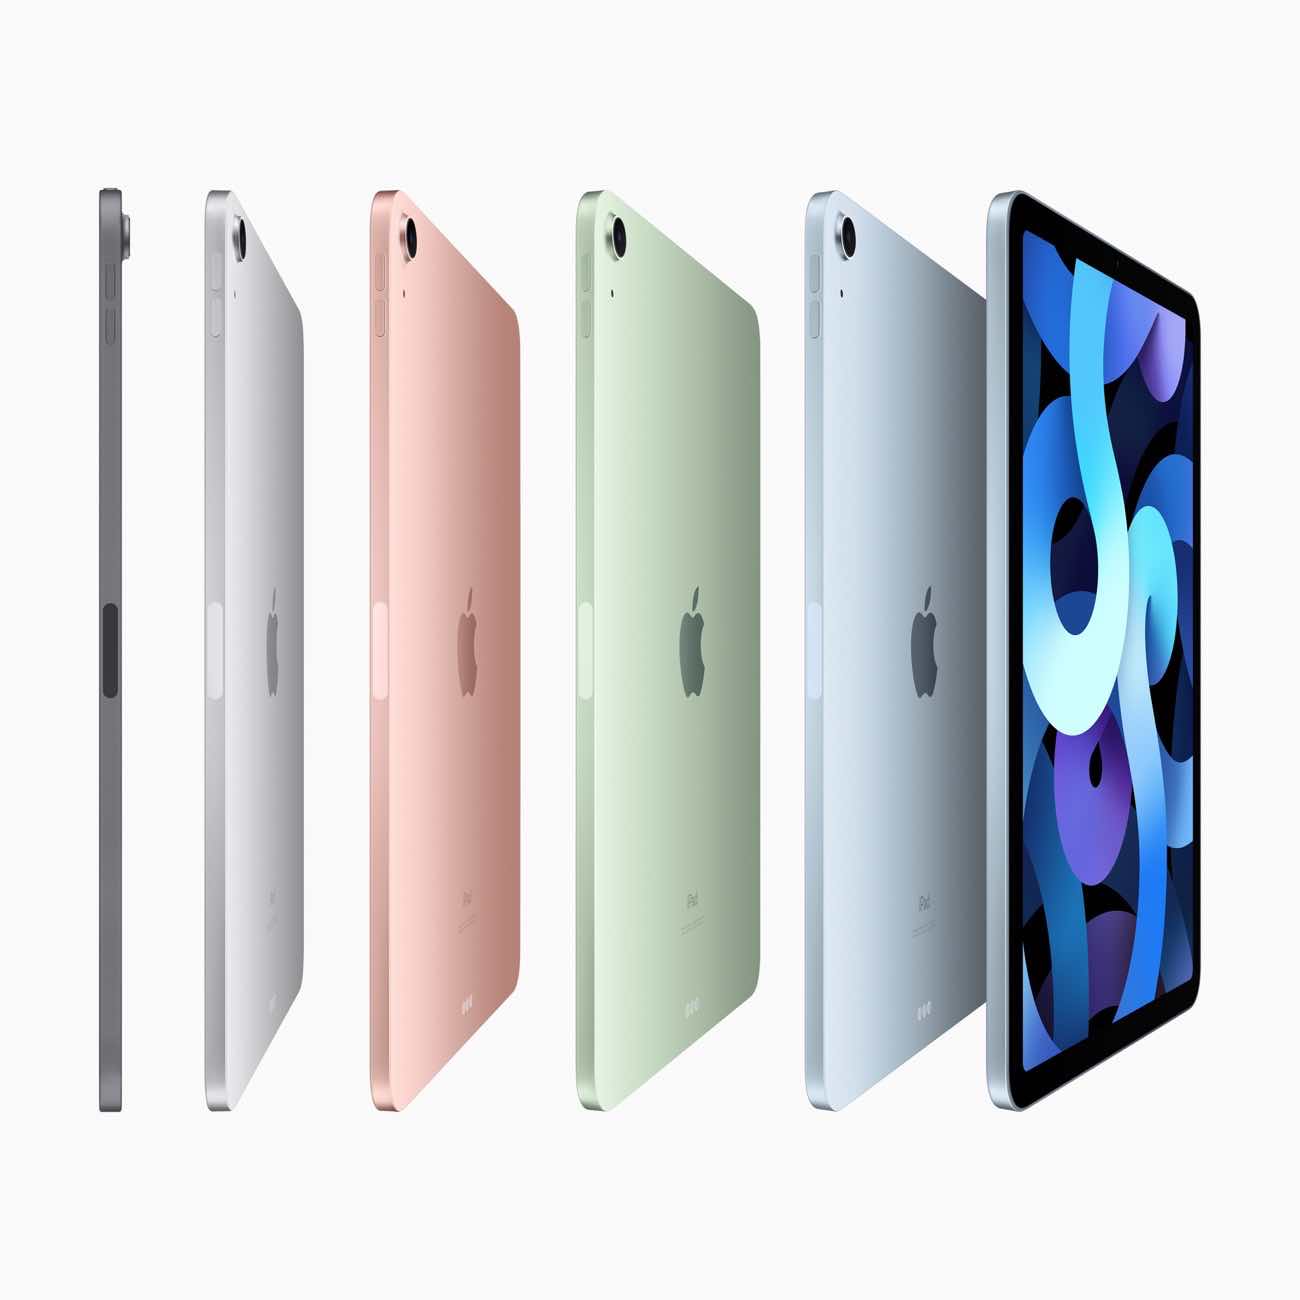 The 2020 iPad Air with an iPad Pro-like form factor